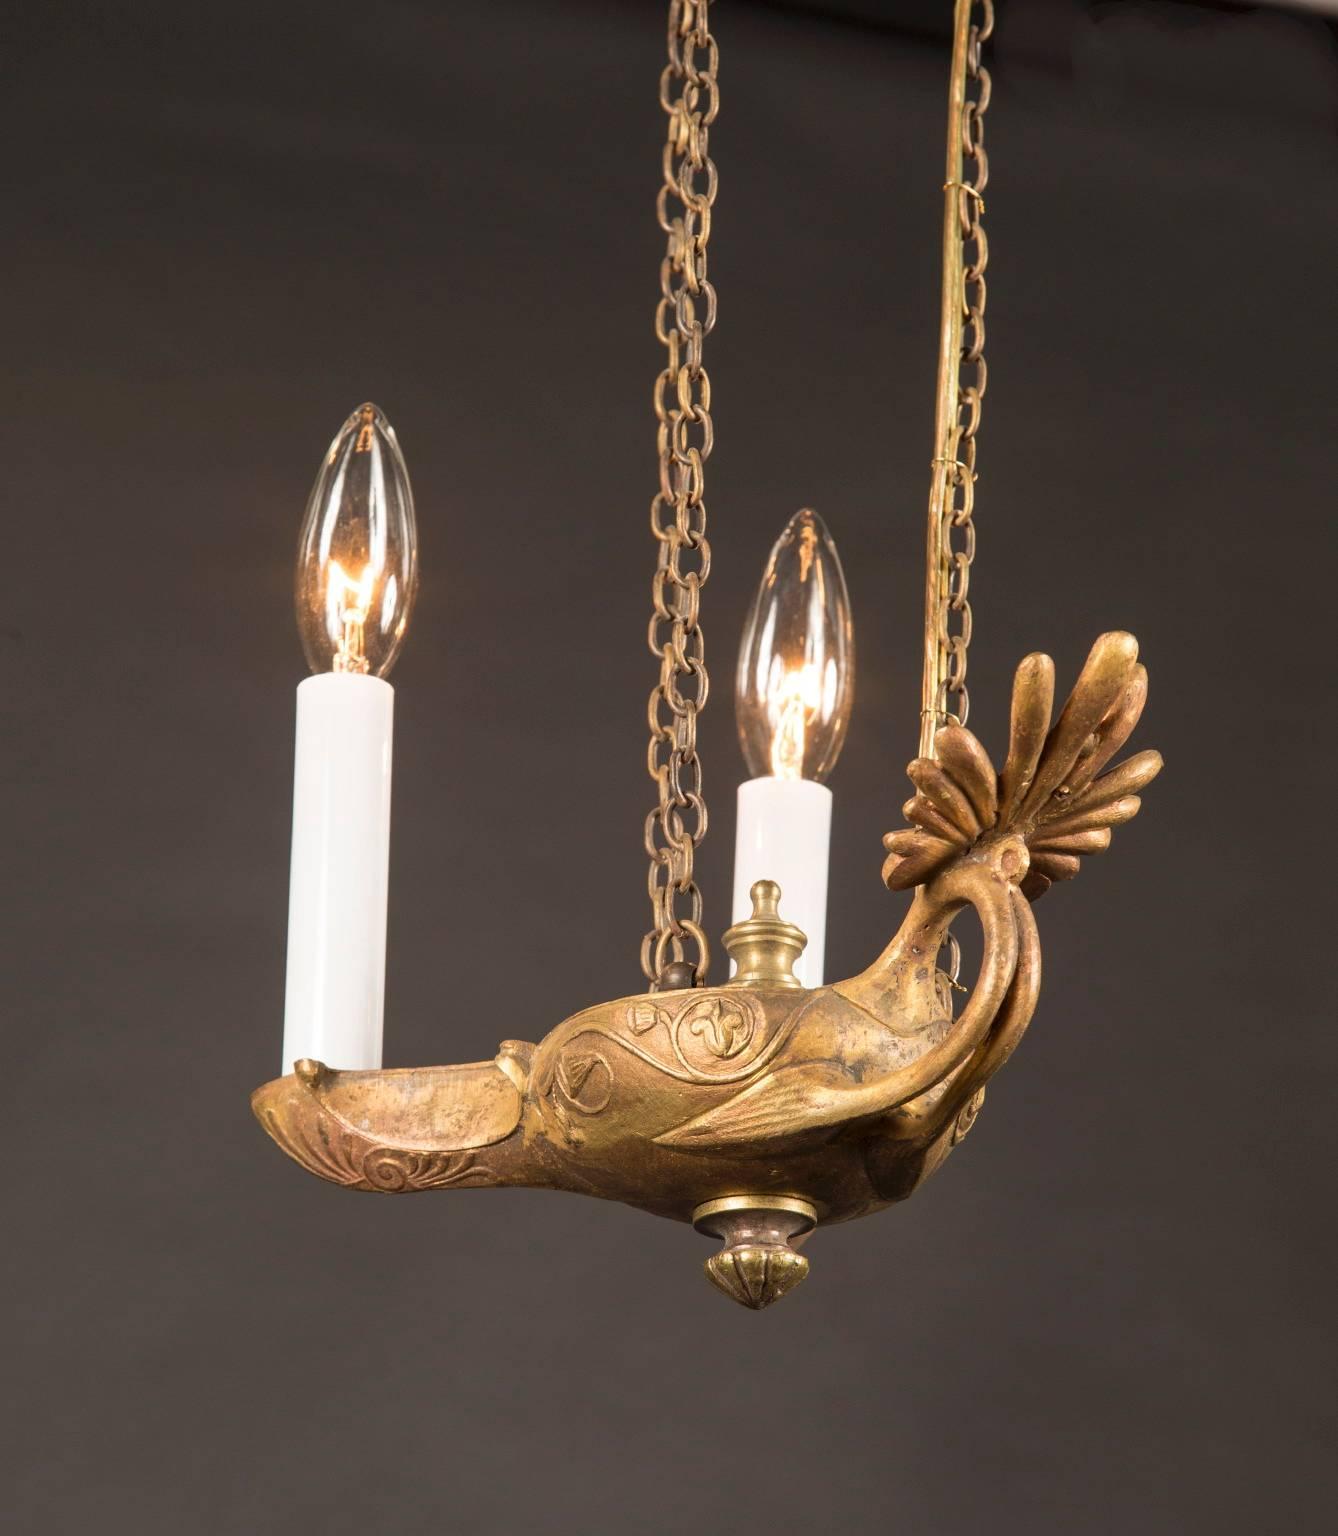 This pair of French bronze hanging oil lamps dates back to the 19th century and suspend from beautifully elaborate heavy chain. The crown resembles a gothic revival sunburst, connecting to the lamp in three positions. The lamp itself features